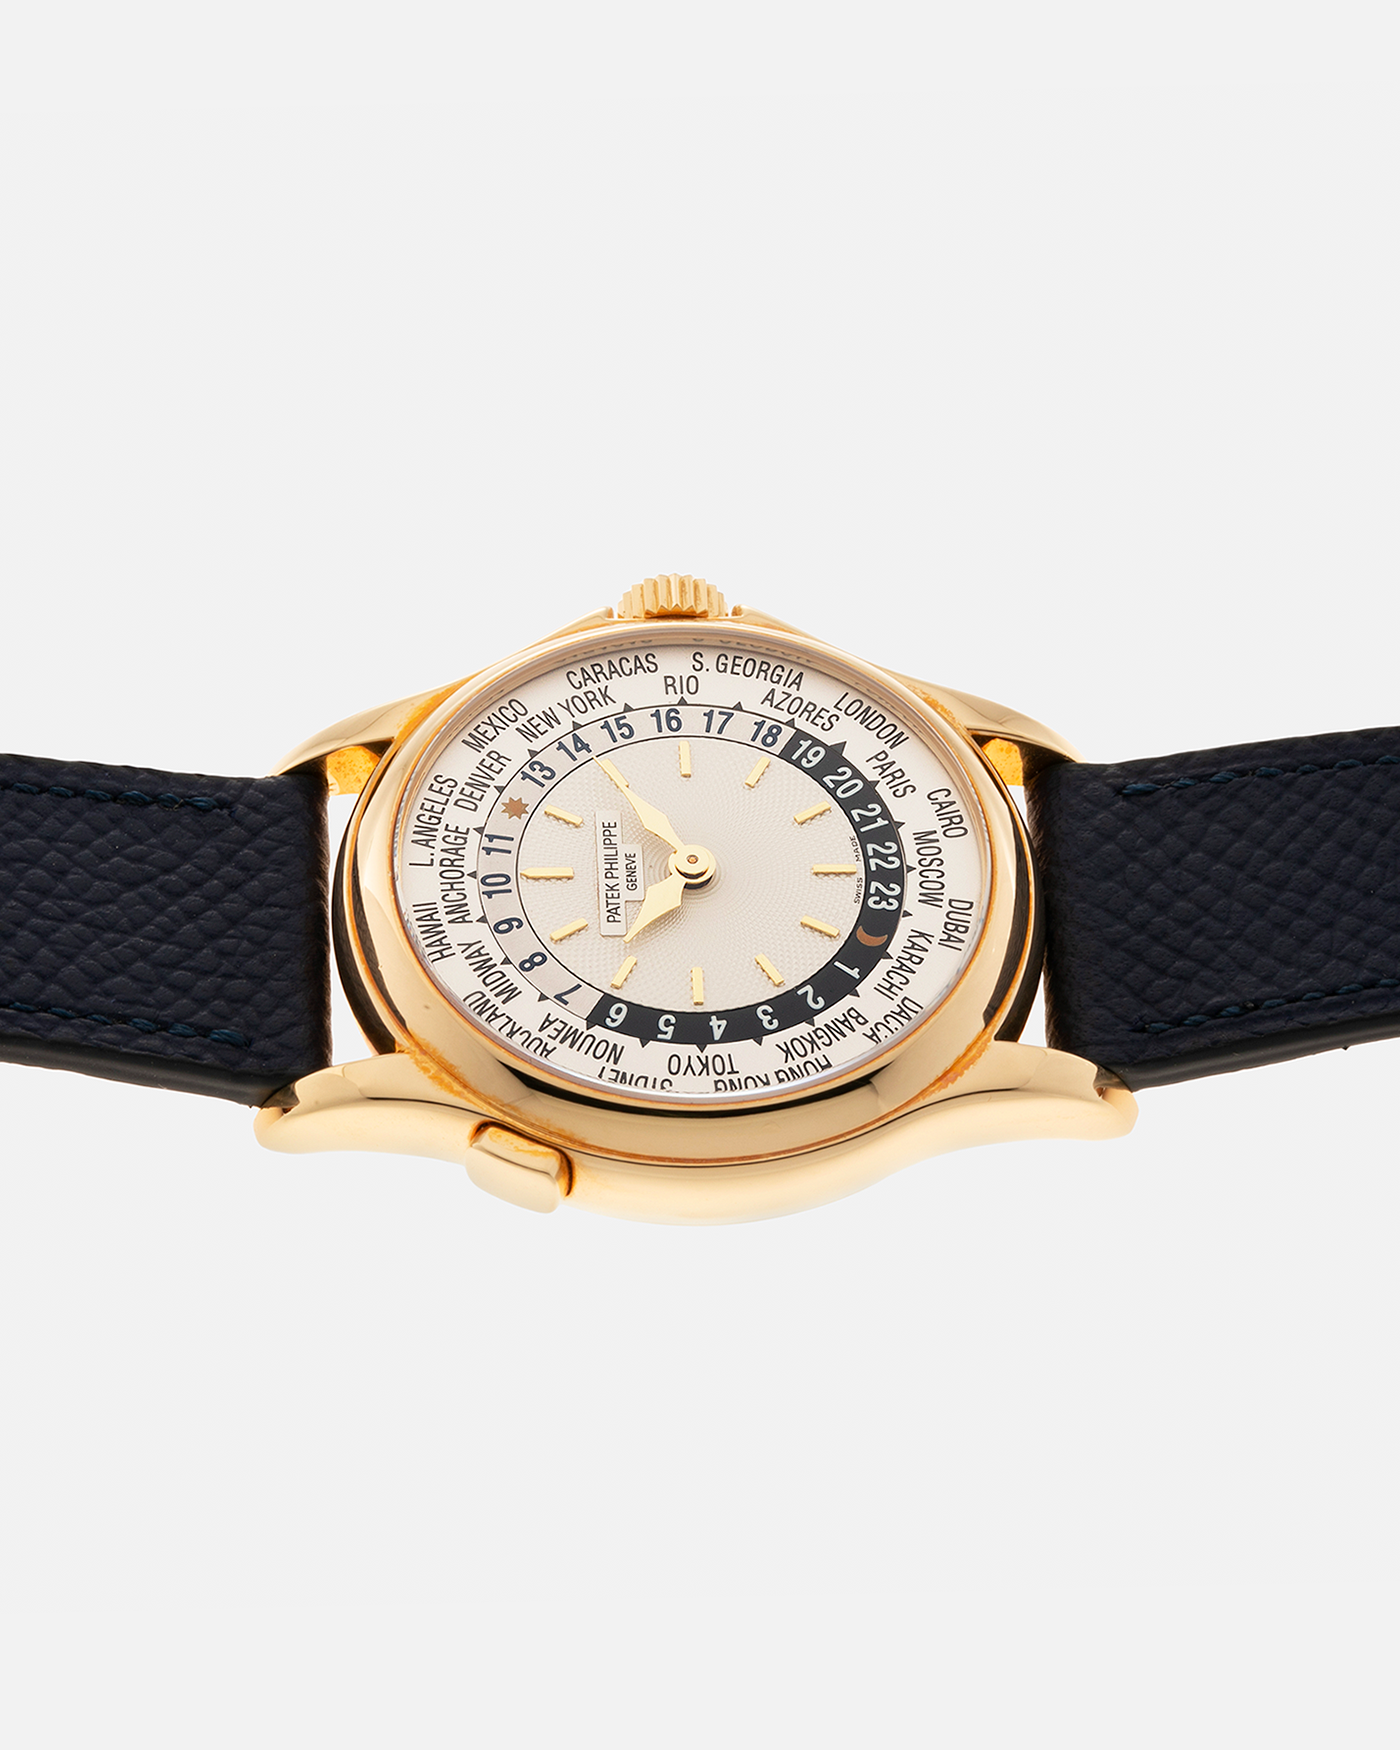 Brand: Patek Philippe Year: 2000s Model: World Time Reference Number: 5110J Material: 18-carat Yellow Gold Movement: Patek Philippe Cal. 240 HU Micro-Rotor, Self-Winding Case Diameter: 37mm Lug Width: 20mm Bracelet: Nostime Navy Blue Textured Calf Leather Strap with Signed 18-carat Yellow Gold Deployant Clasp, Patek Philippe Brown Alligator Leather Strap (Used)